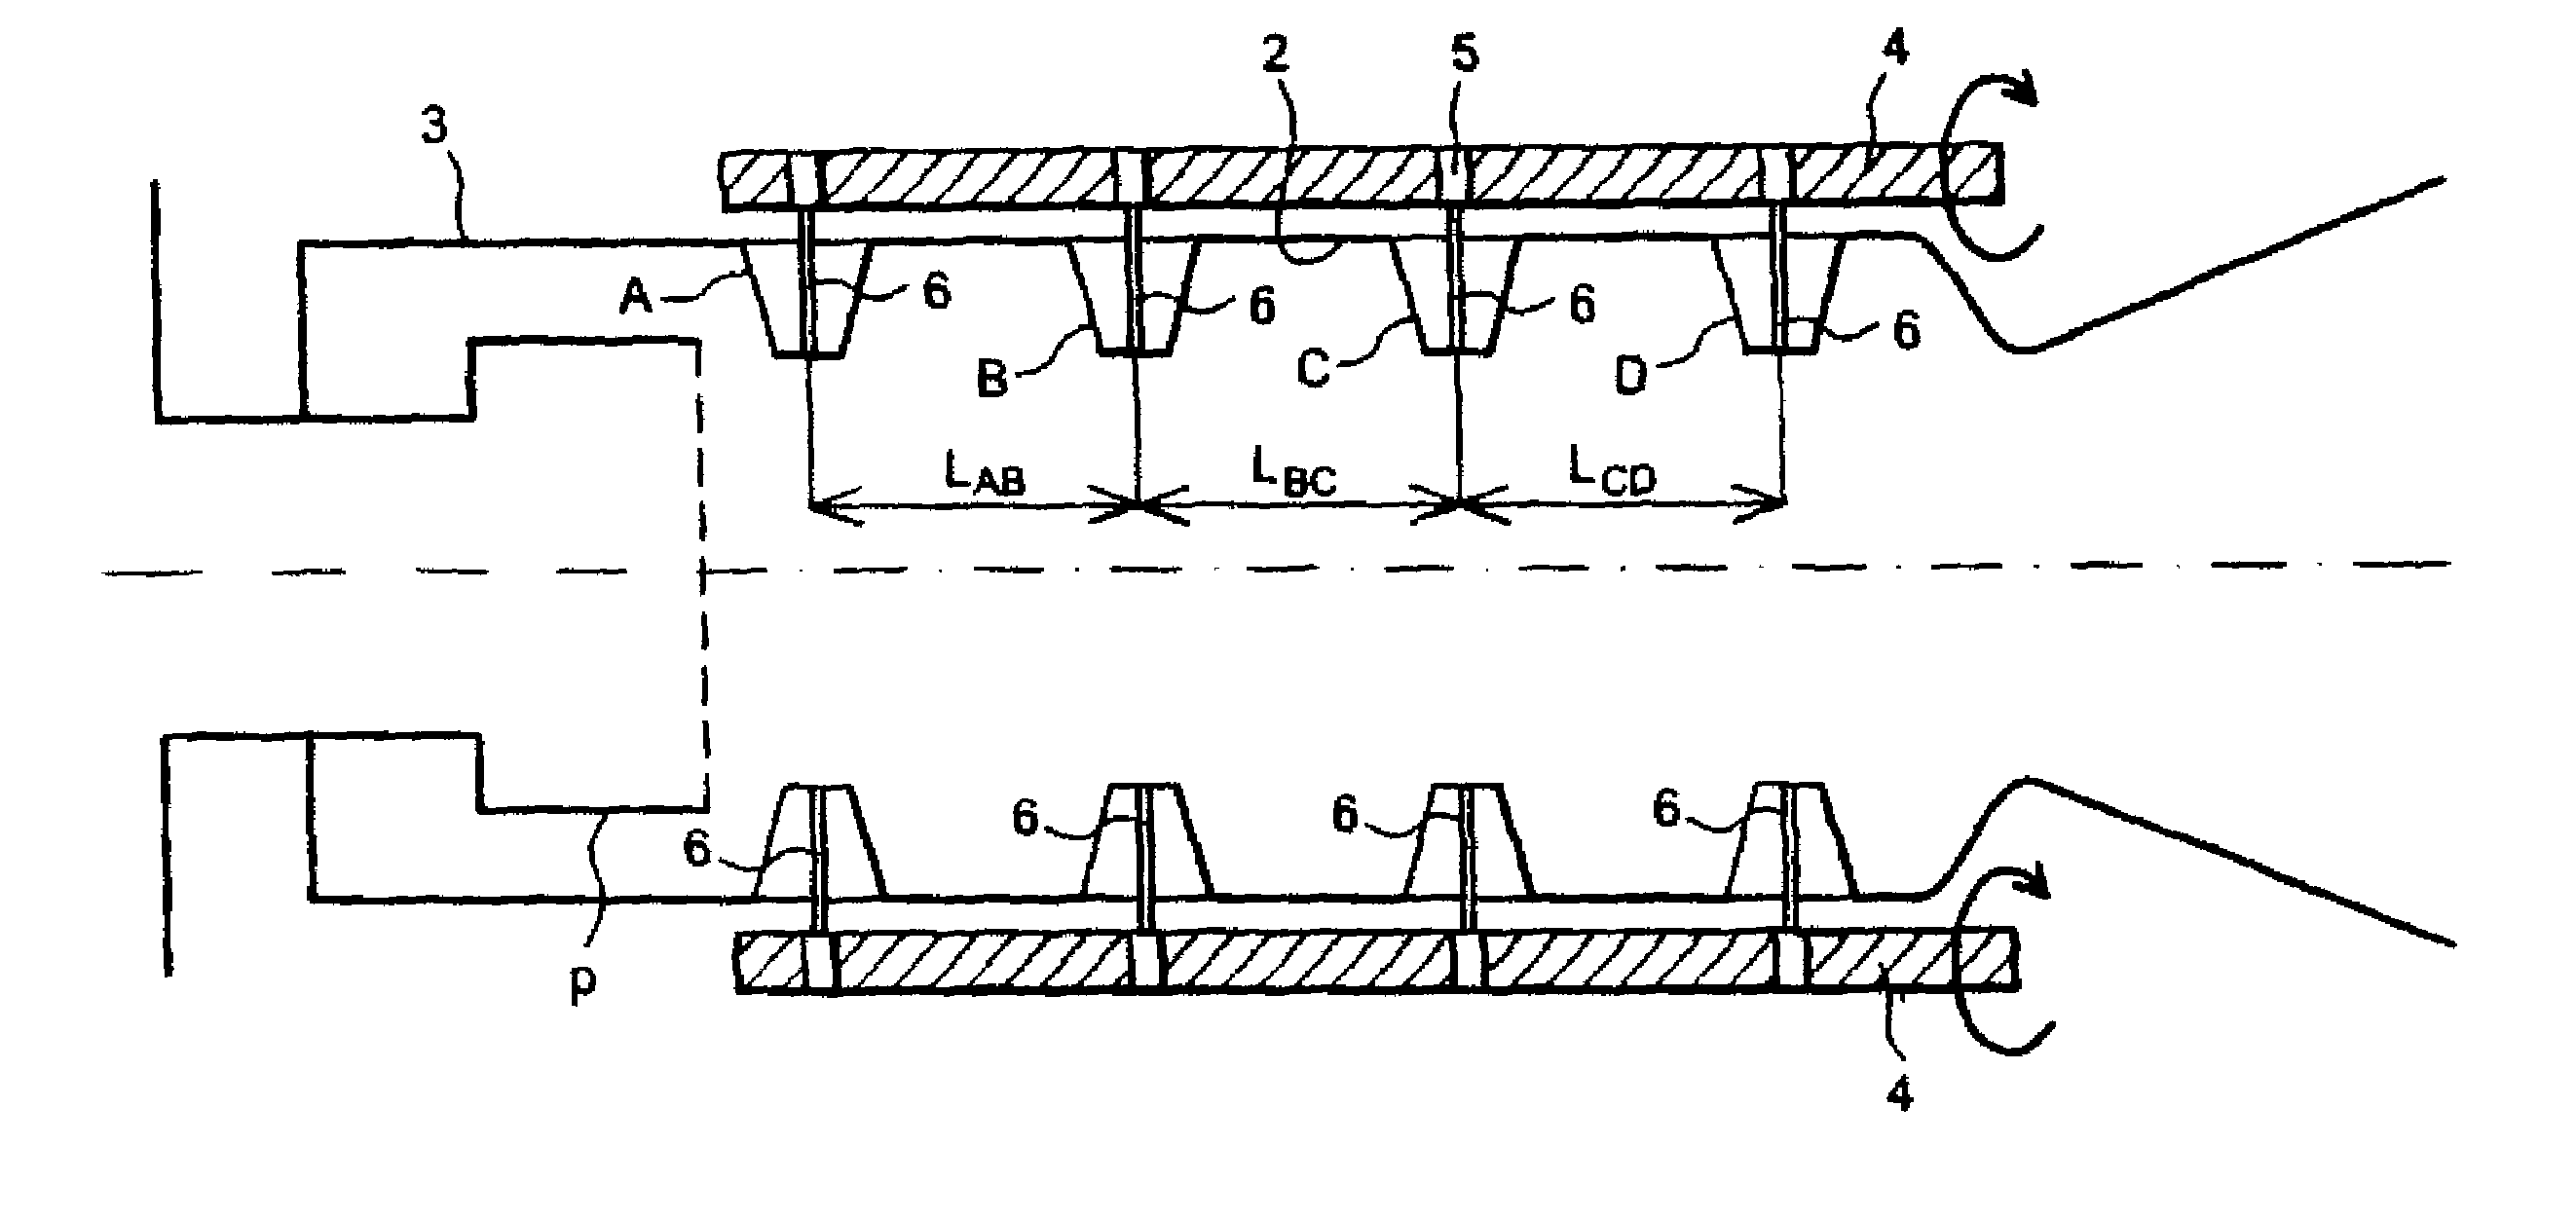 Micro-wave tube with mechanical frequency tuning